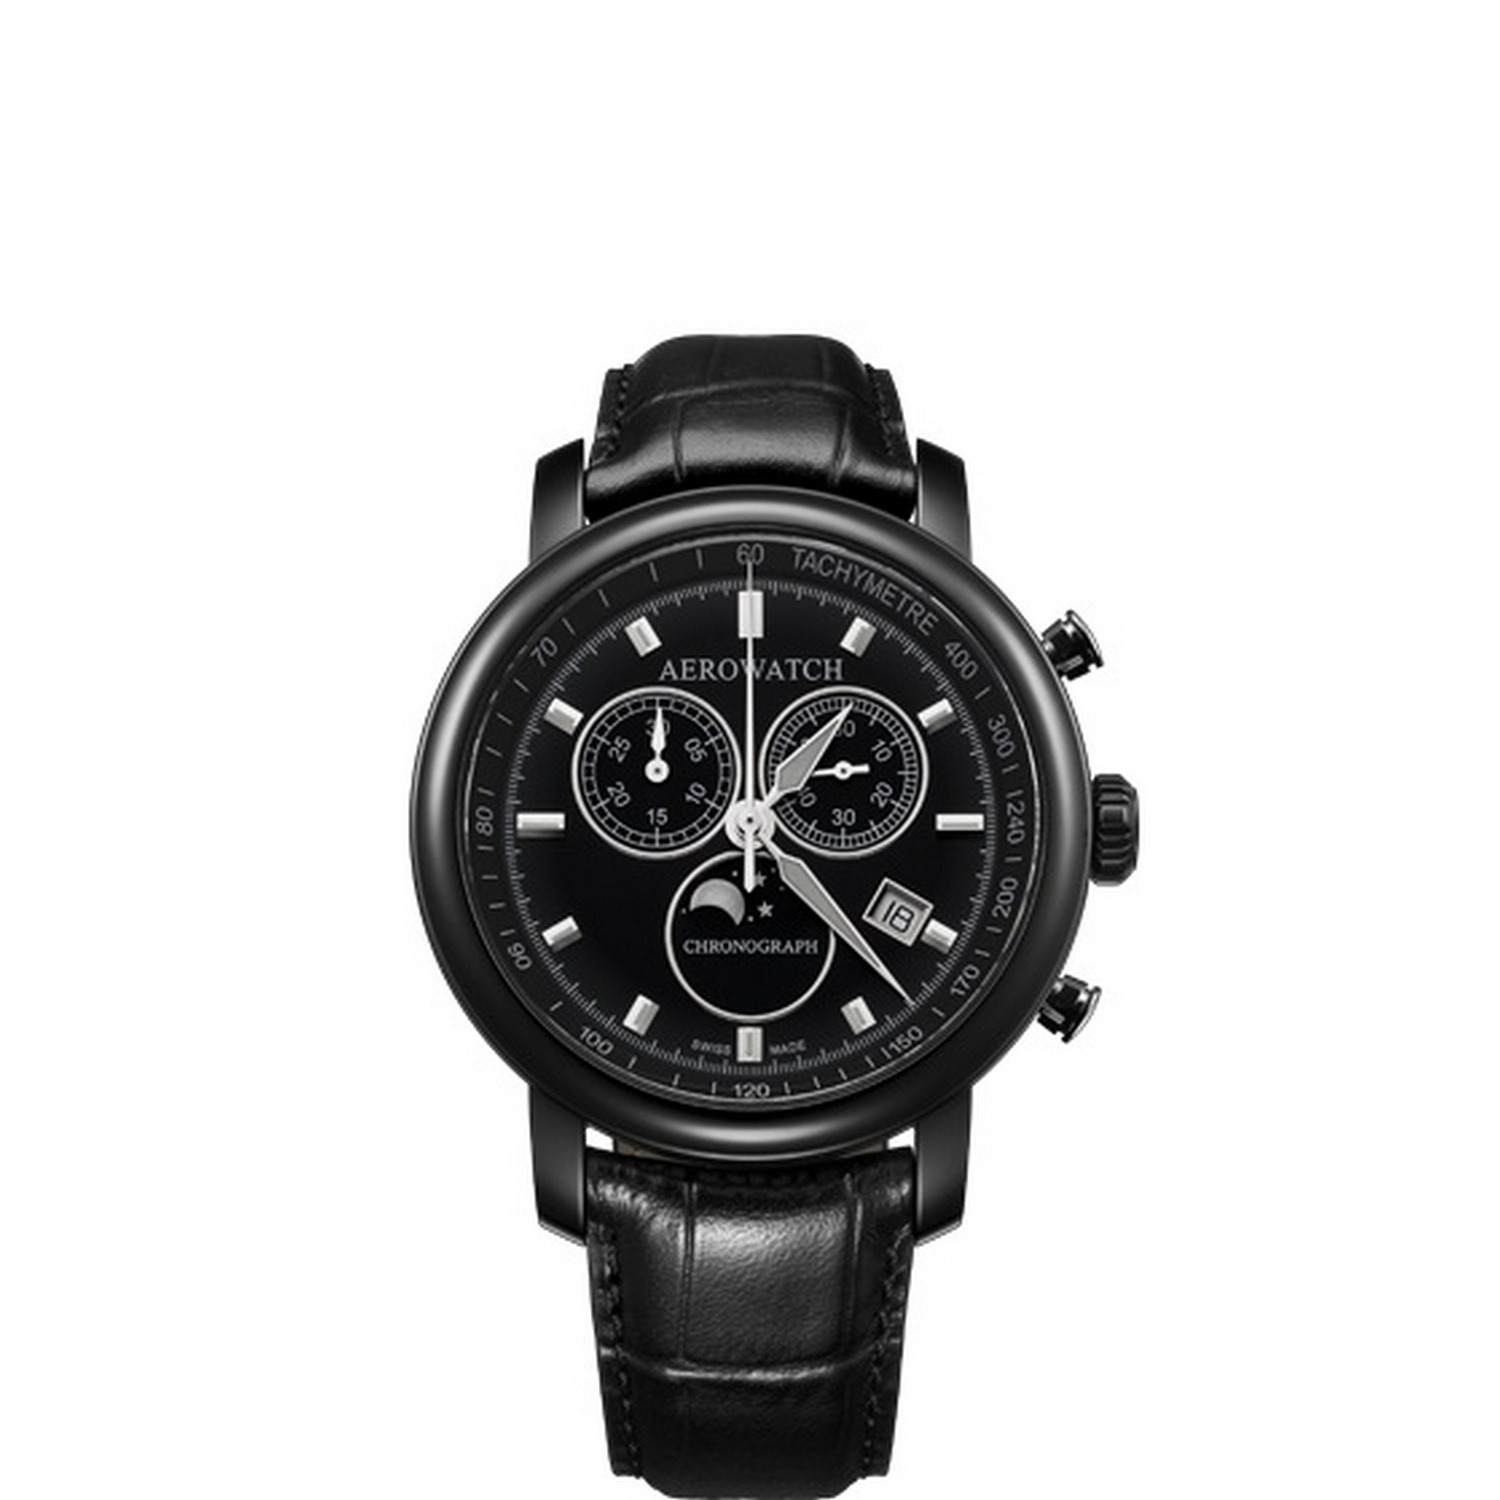 Aerowatch Renaissance Chronograph Moon-Phases (Phases de Lune) A 84936 NO03 Watch, black